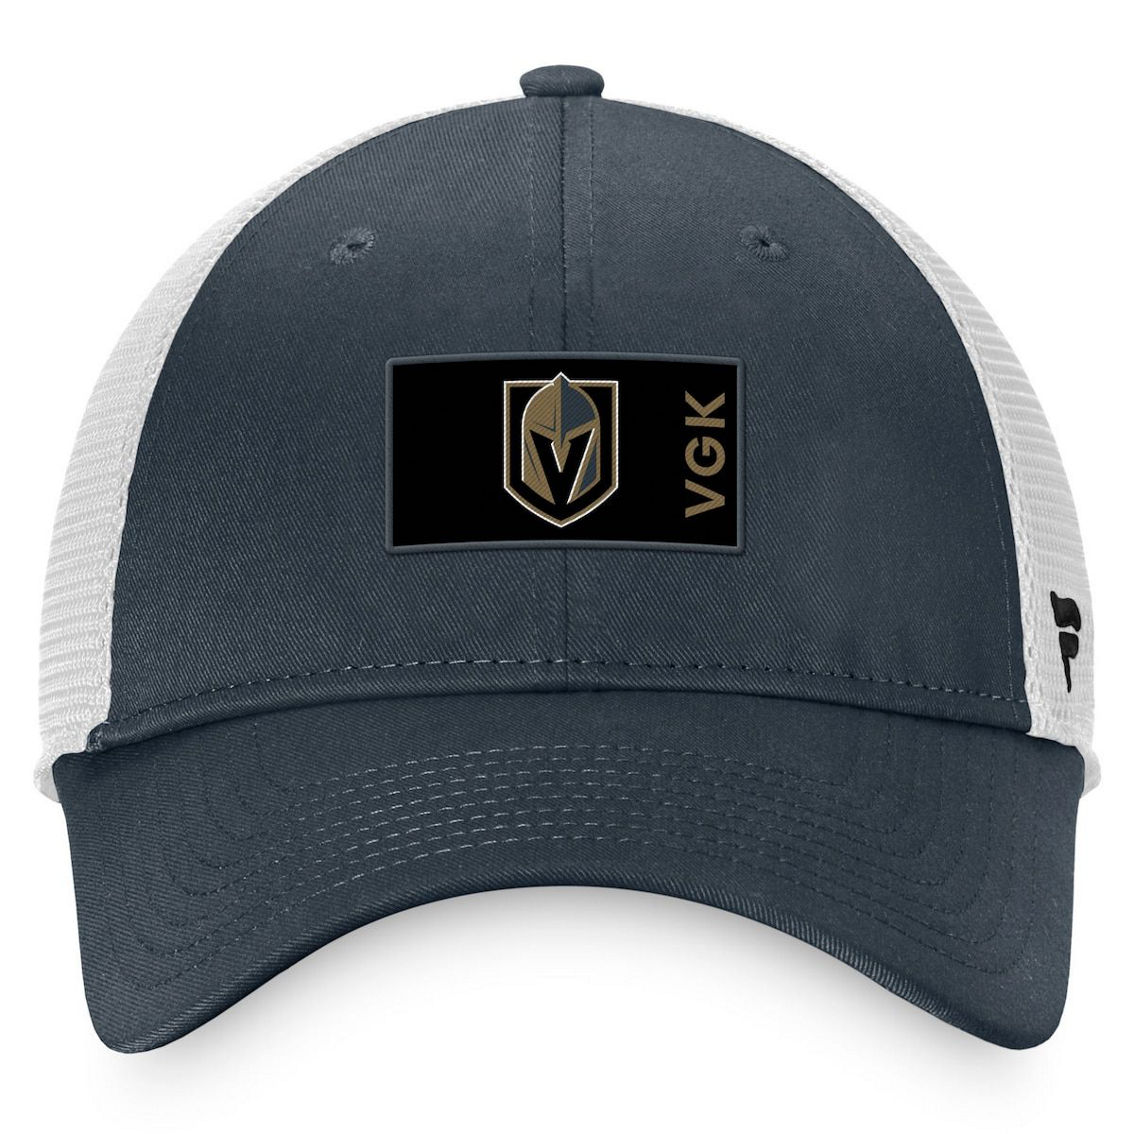 Fanatics Branded Men's Charcoal/White Vegas Golden Knights Authentic Pro Rink Trucker Snapback Hat - Image 3 of 4